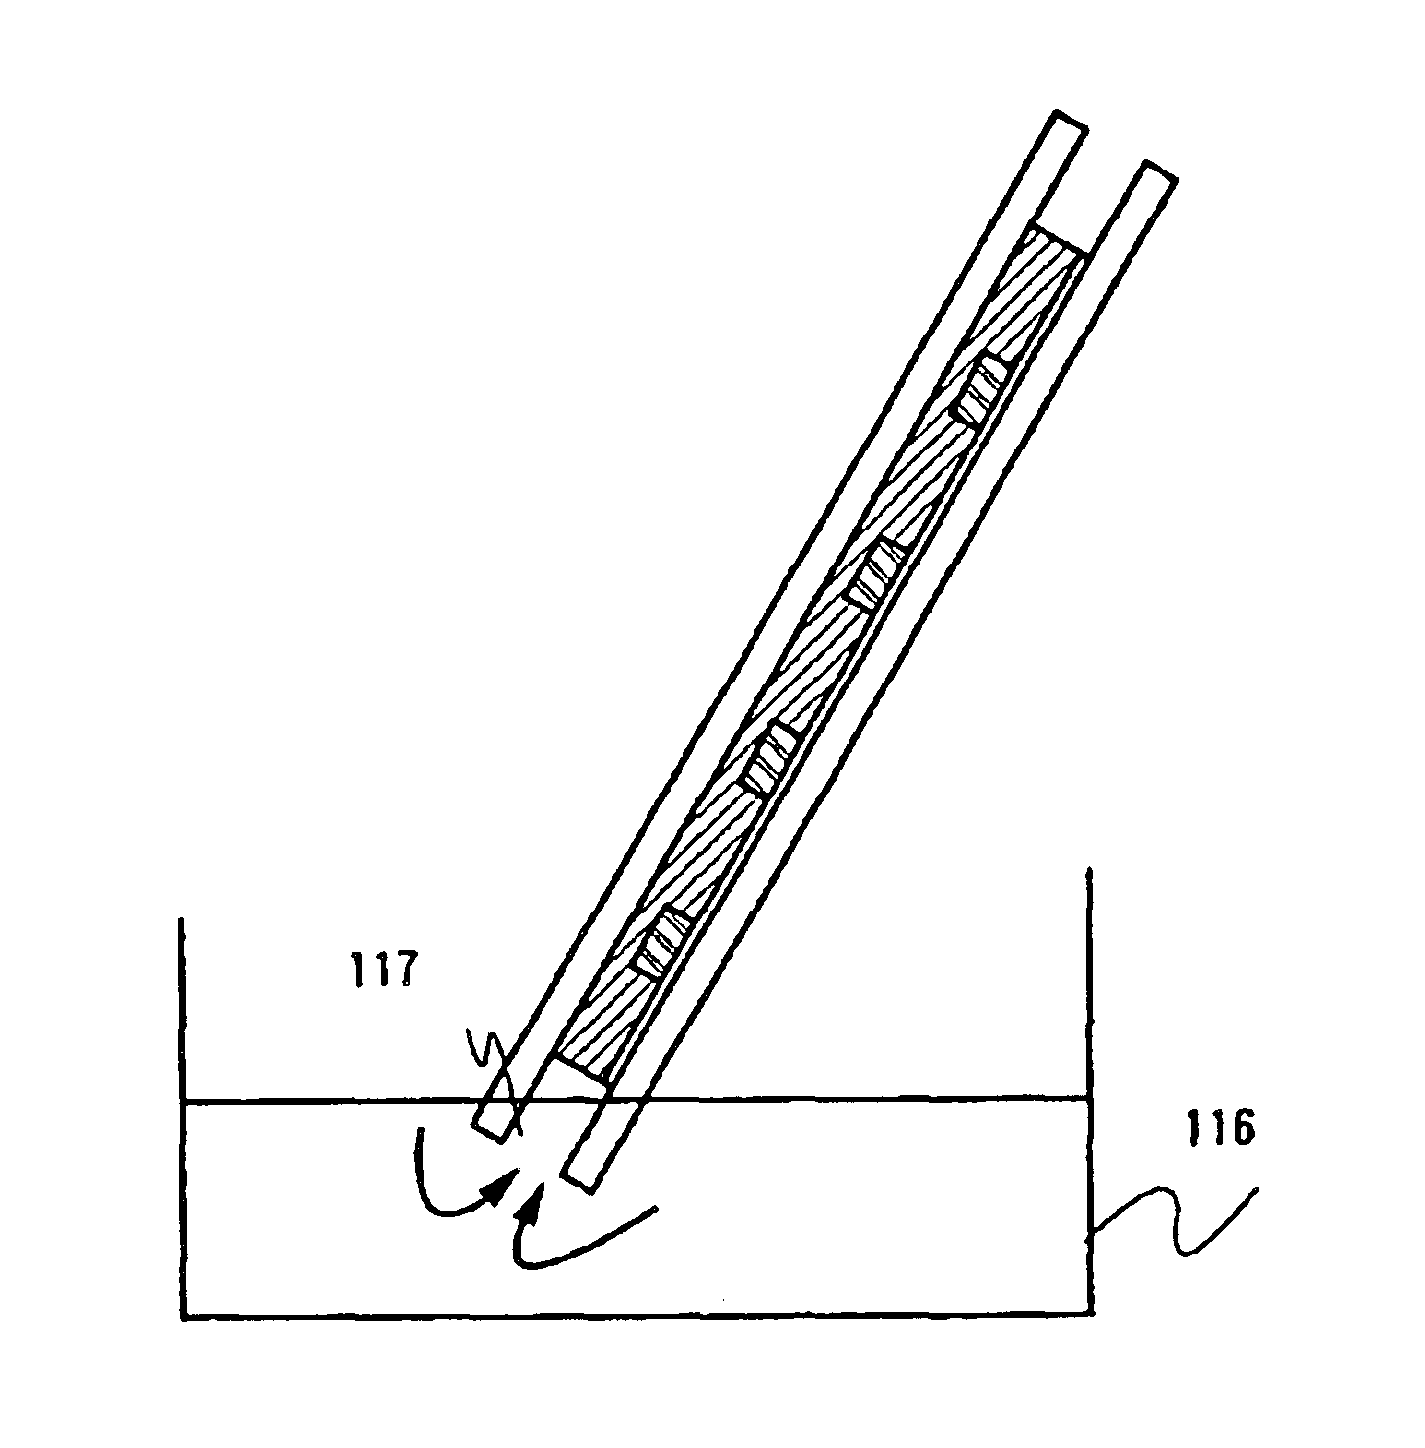 Organic thin film transistor and method of manufacturing the same, and semiconductor device having the organic thin film transistor